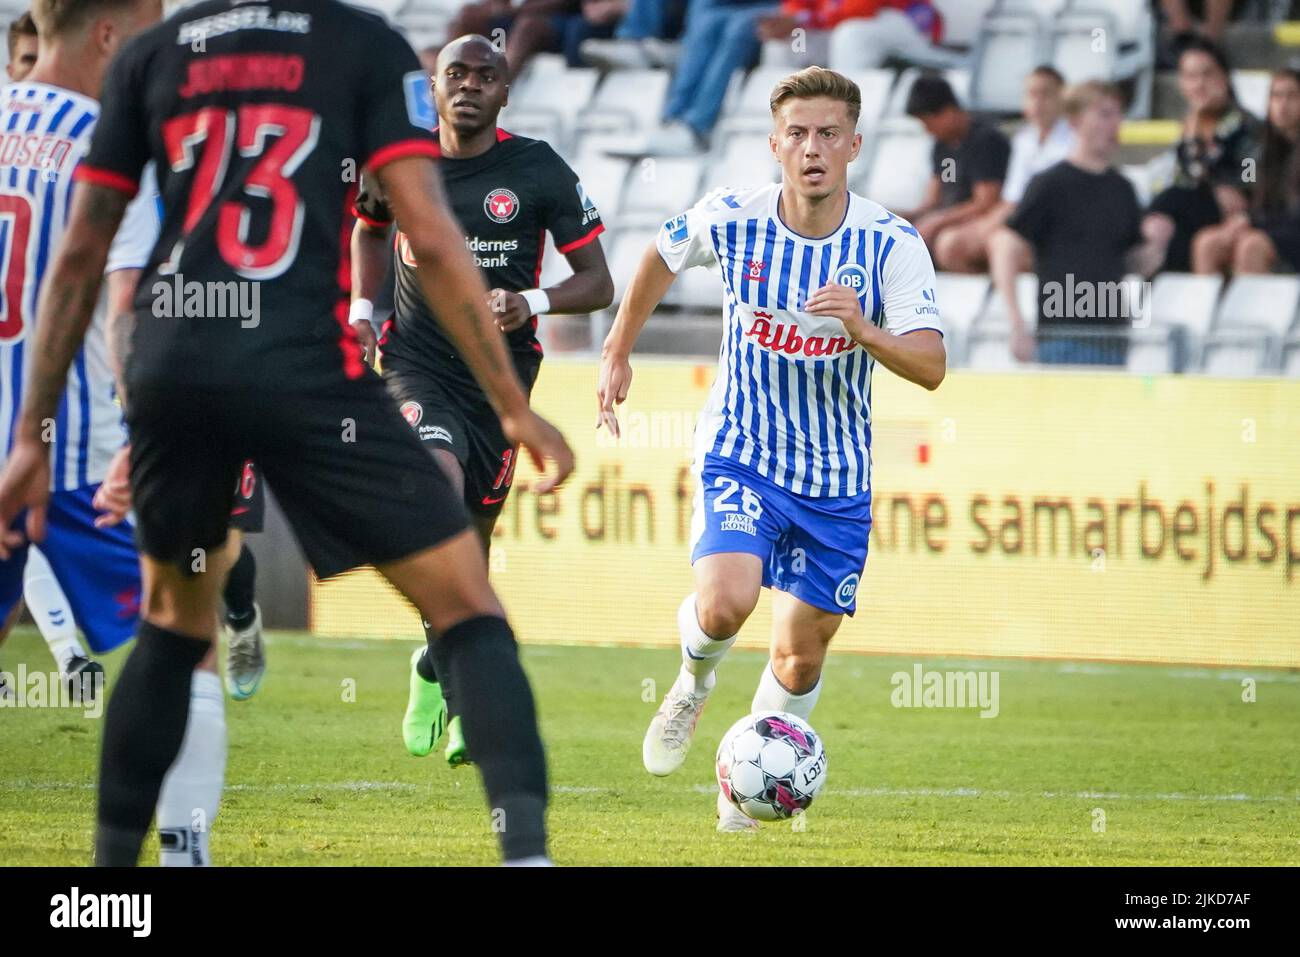 Odense, Denmark. 29th, July 2022. Agon Mucolli (26) of OB seen during the  3F Superliga match between Odense Boldklub and FC Midtjylland at Nature  Energy Park in Odense. (Photo credit: Gonzales Photo -